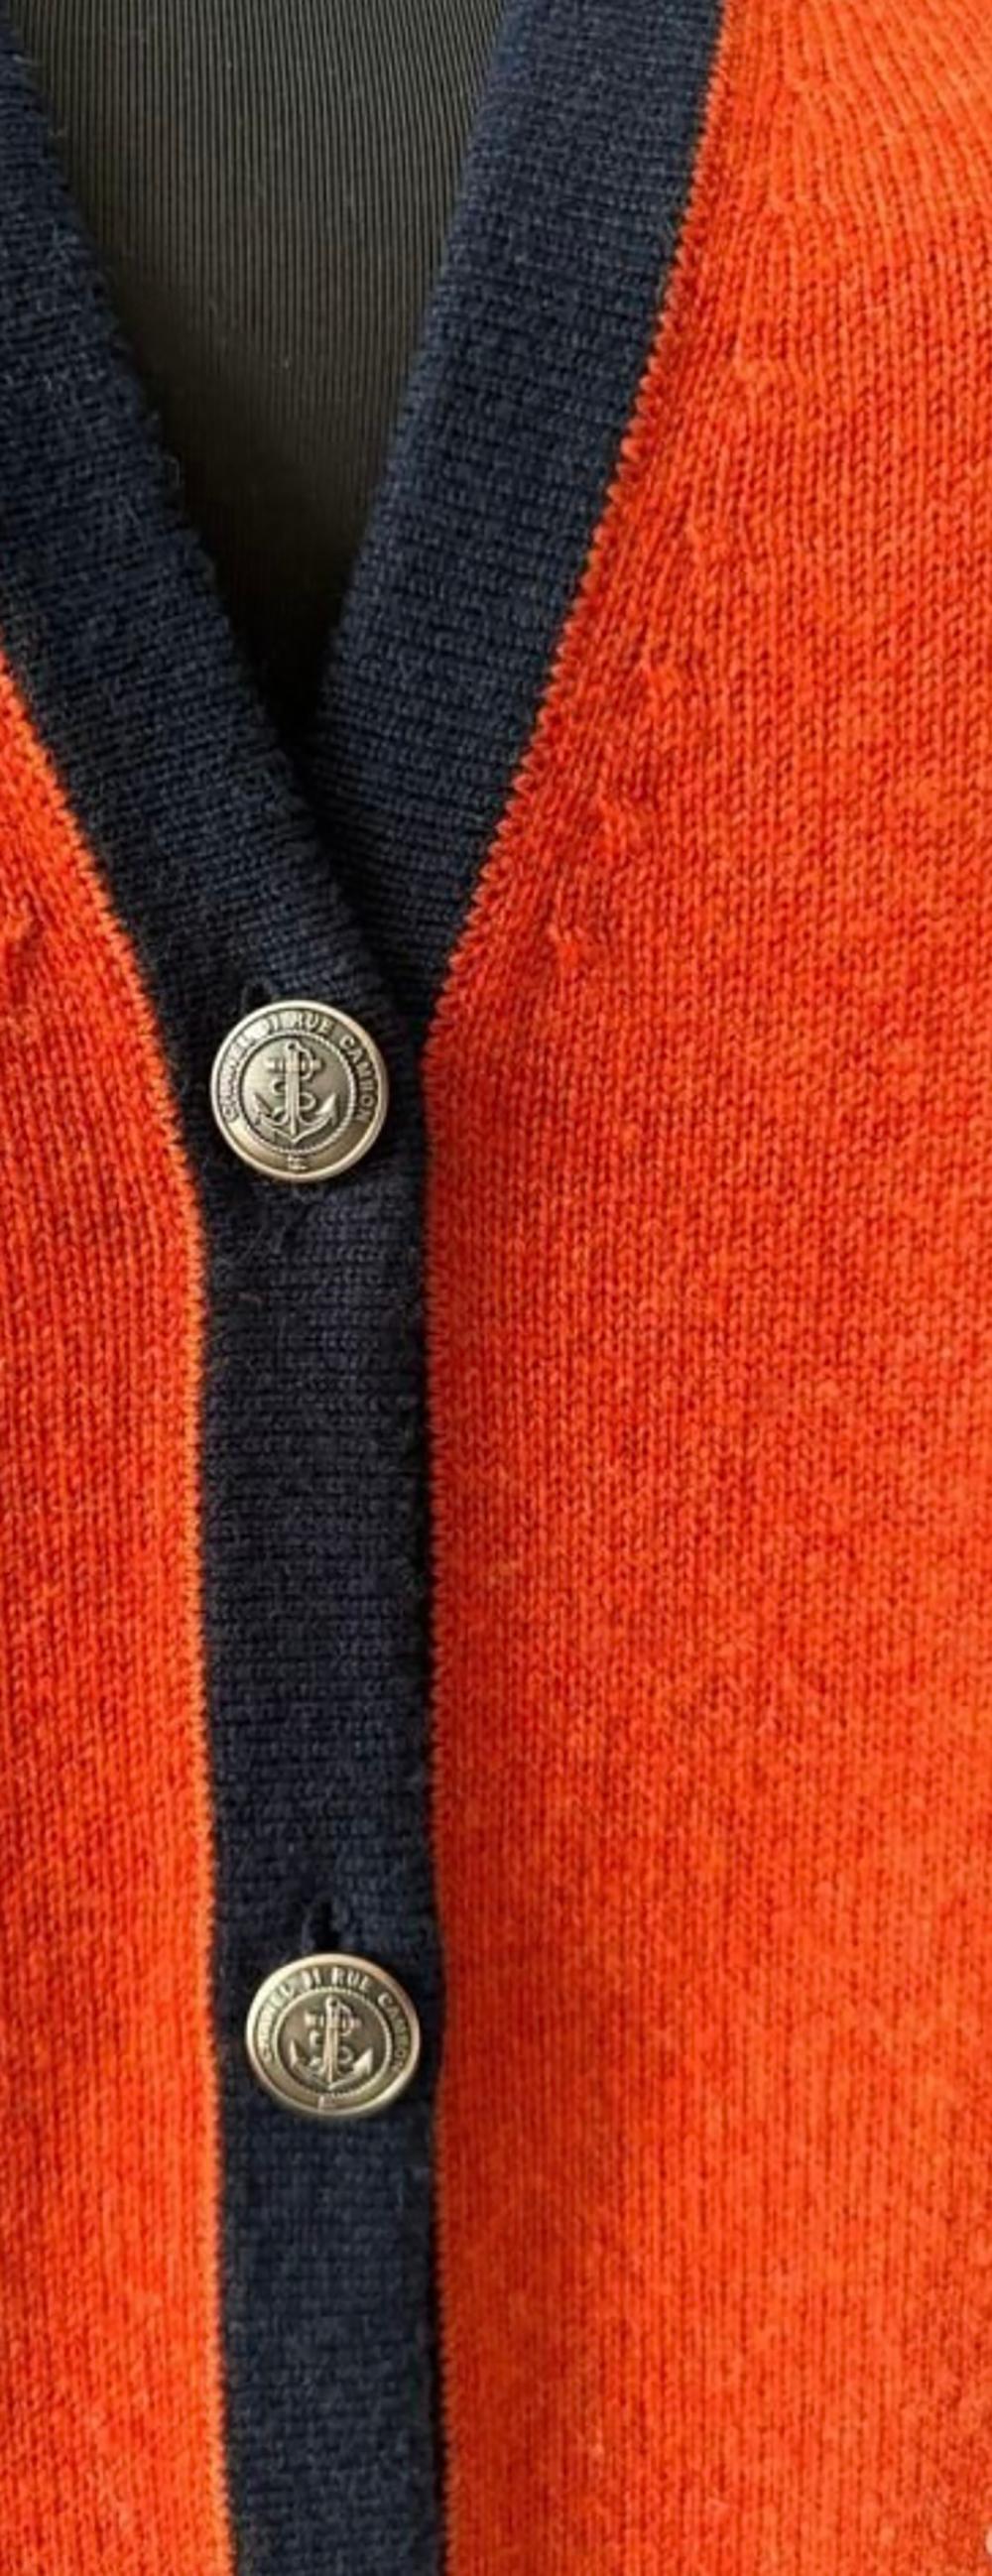 Chanel orange and navy cashmere cardigan from Paris / HAMBURG Collection, 2018 Metiers d'Art Collection, 18A
- stunning colour shade!
- CC logo 'anchor' buttons
Size mark 36 FR.